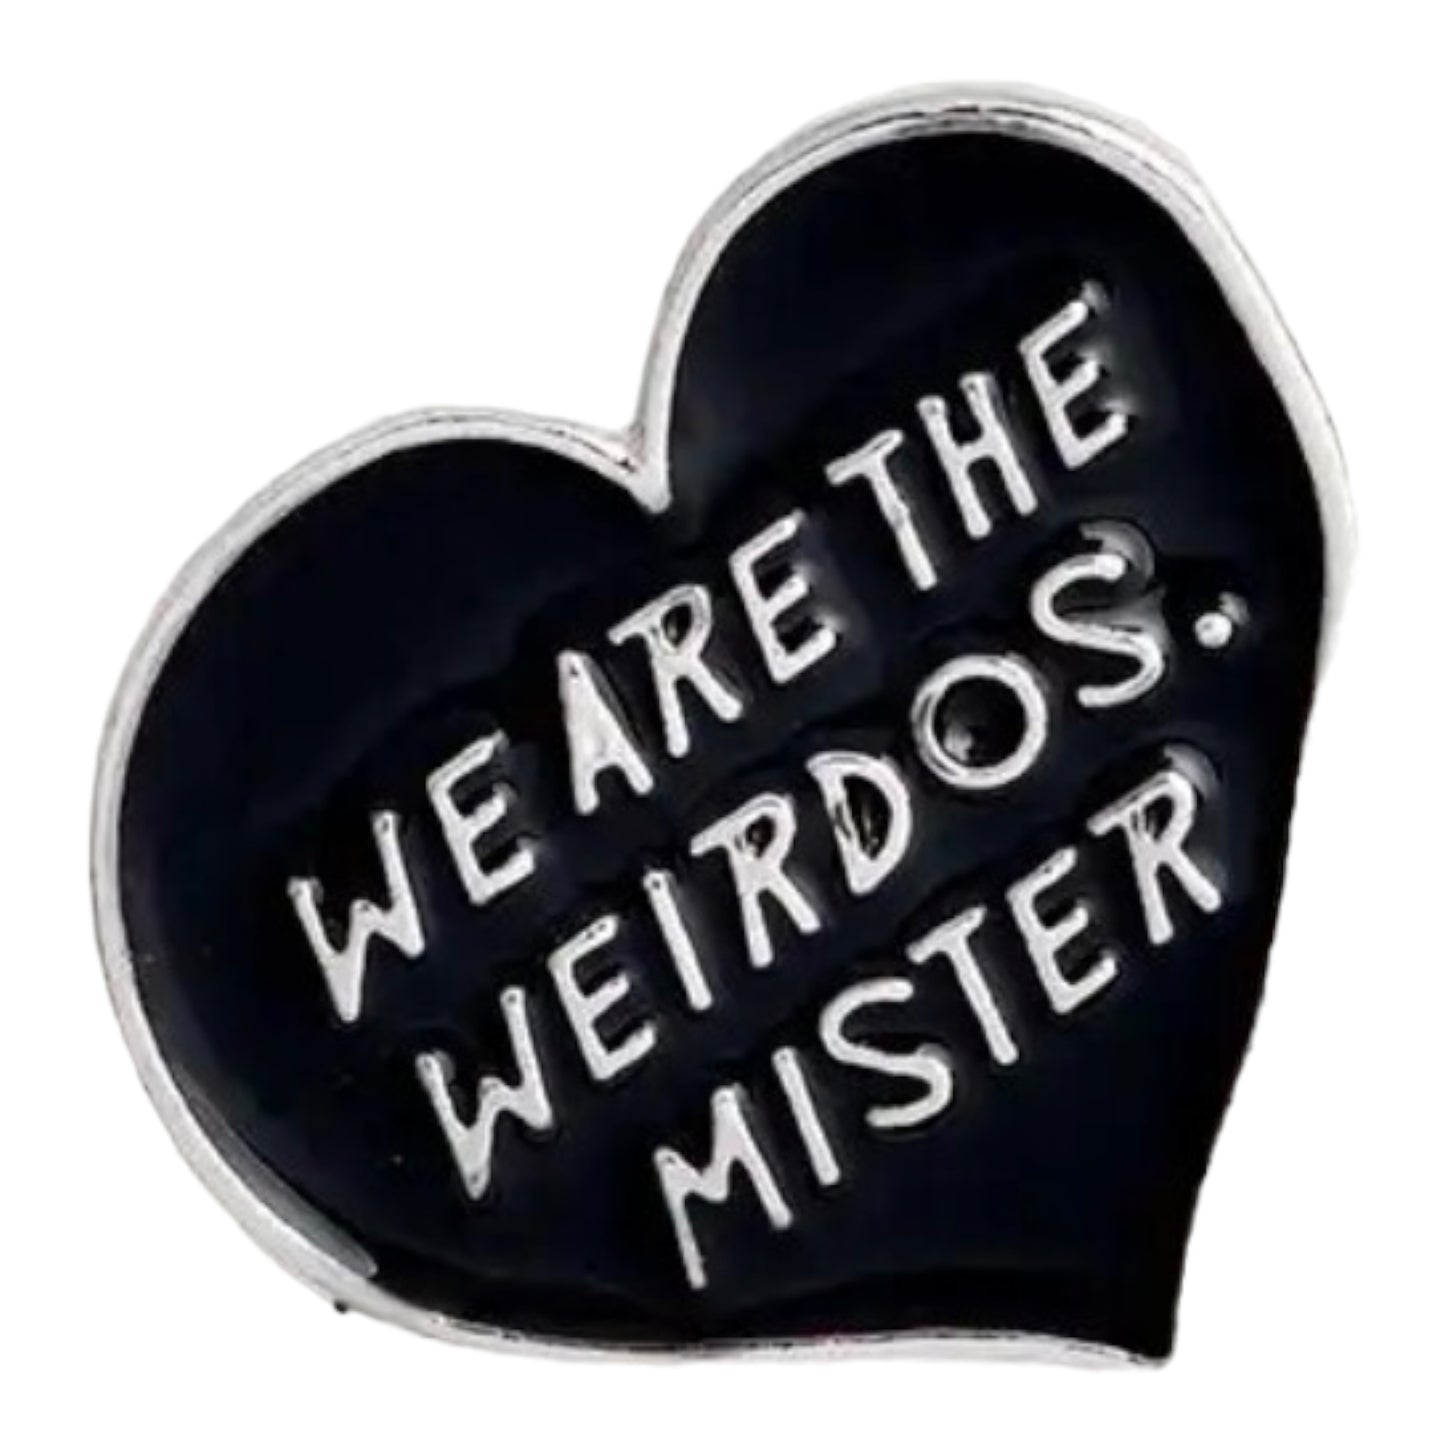 We Are The Weirdos. Mister Enamel Pin